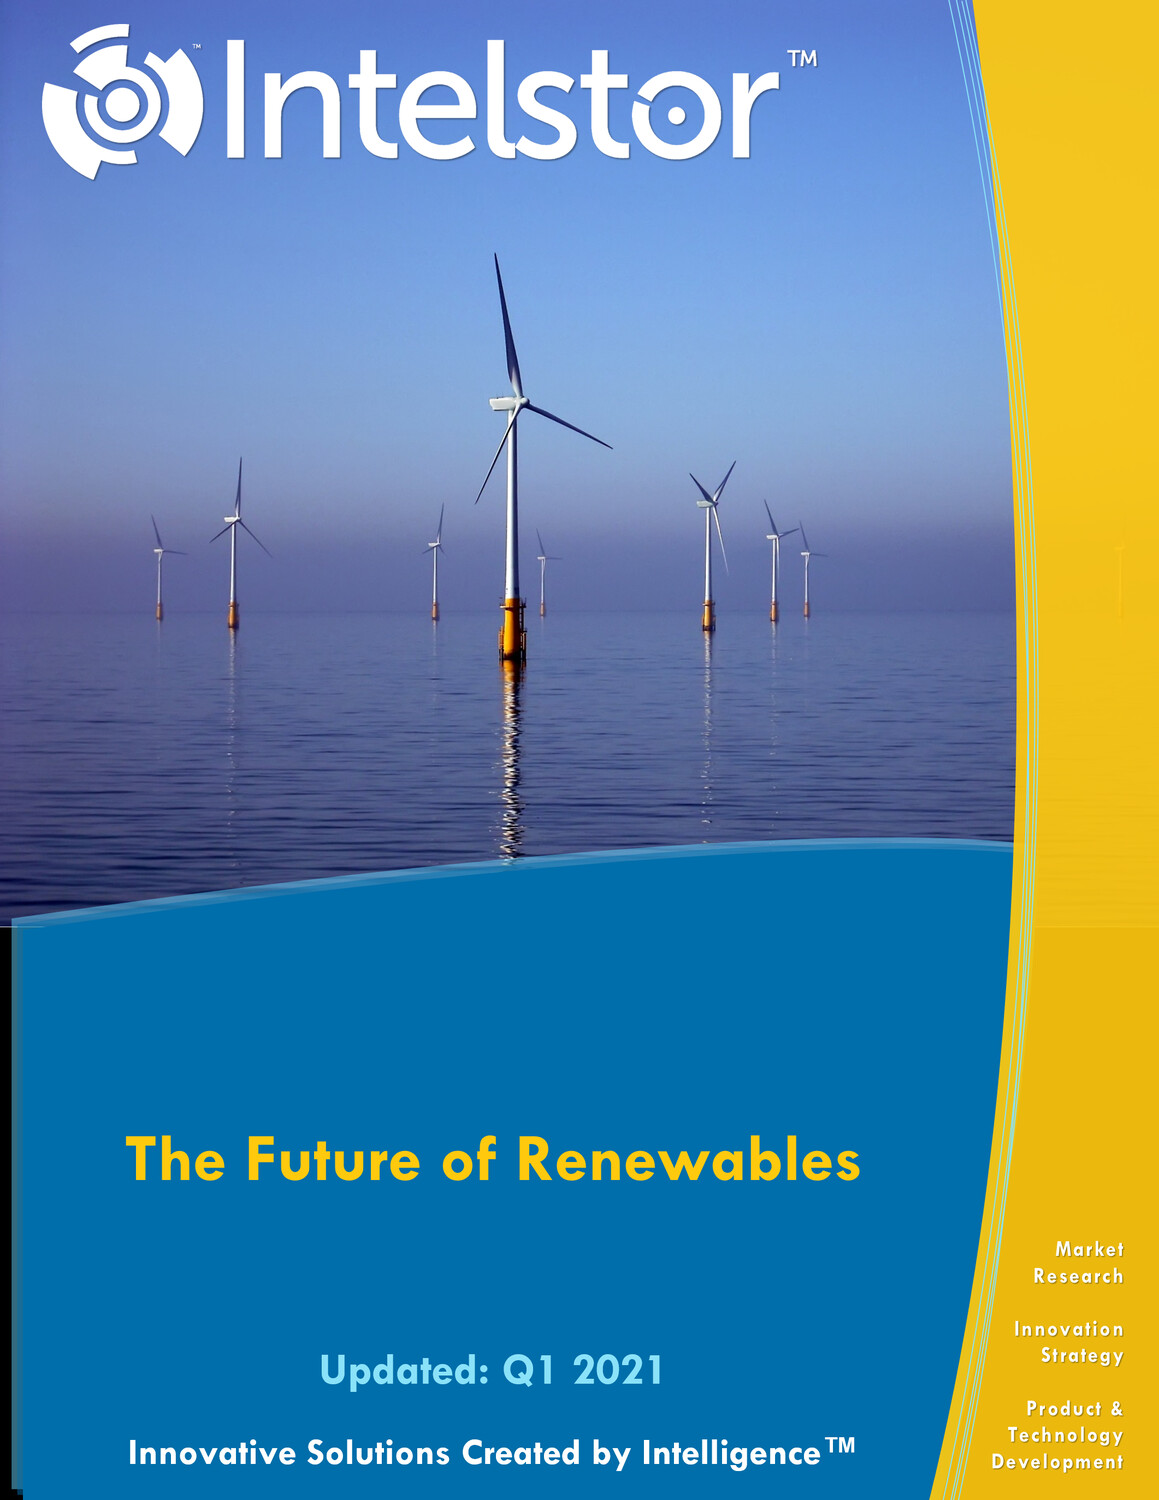 The Future of Renewables Report